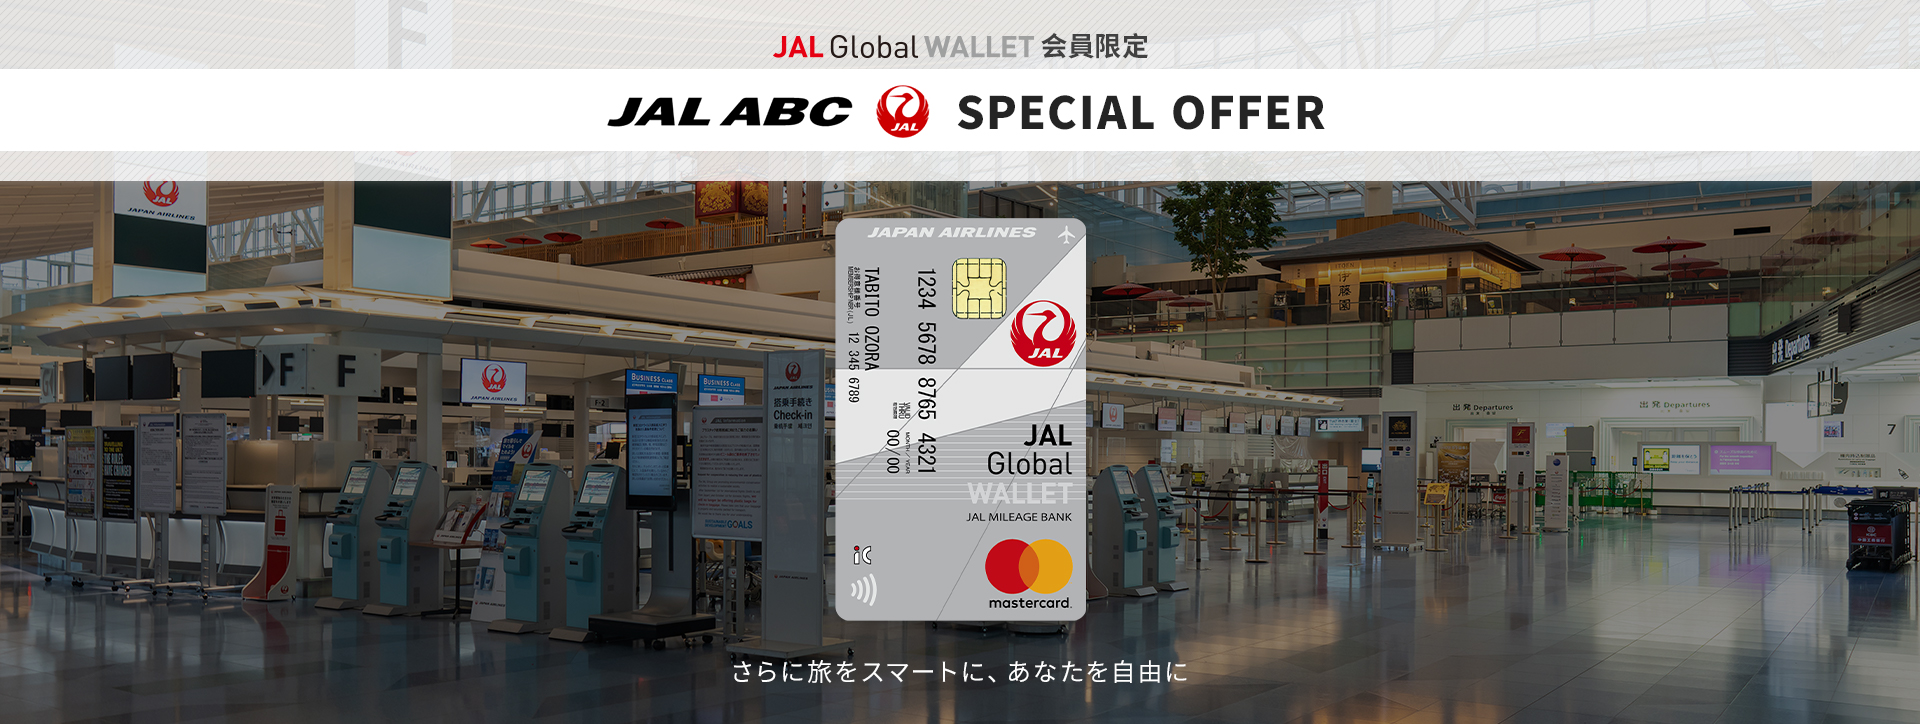 JAL Global WALLET会員限定　JAL ABC　SPECIAL OFFER